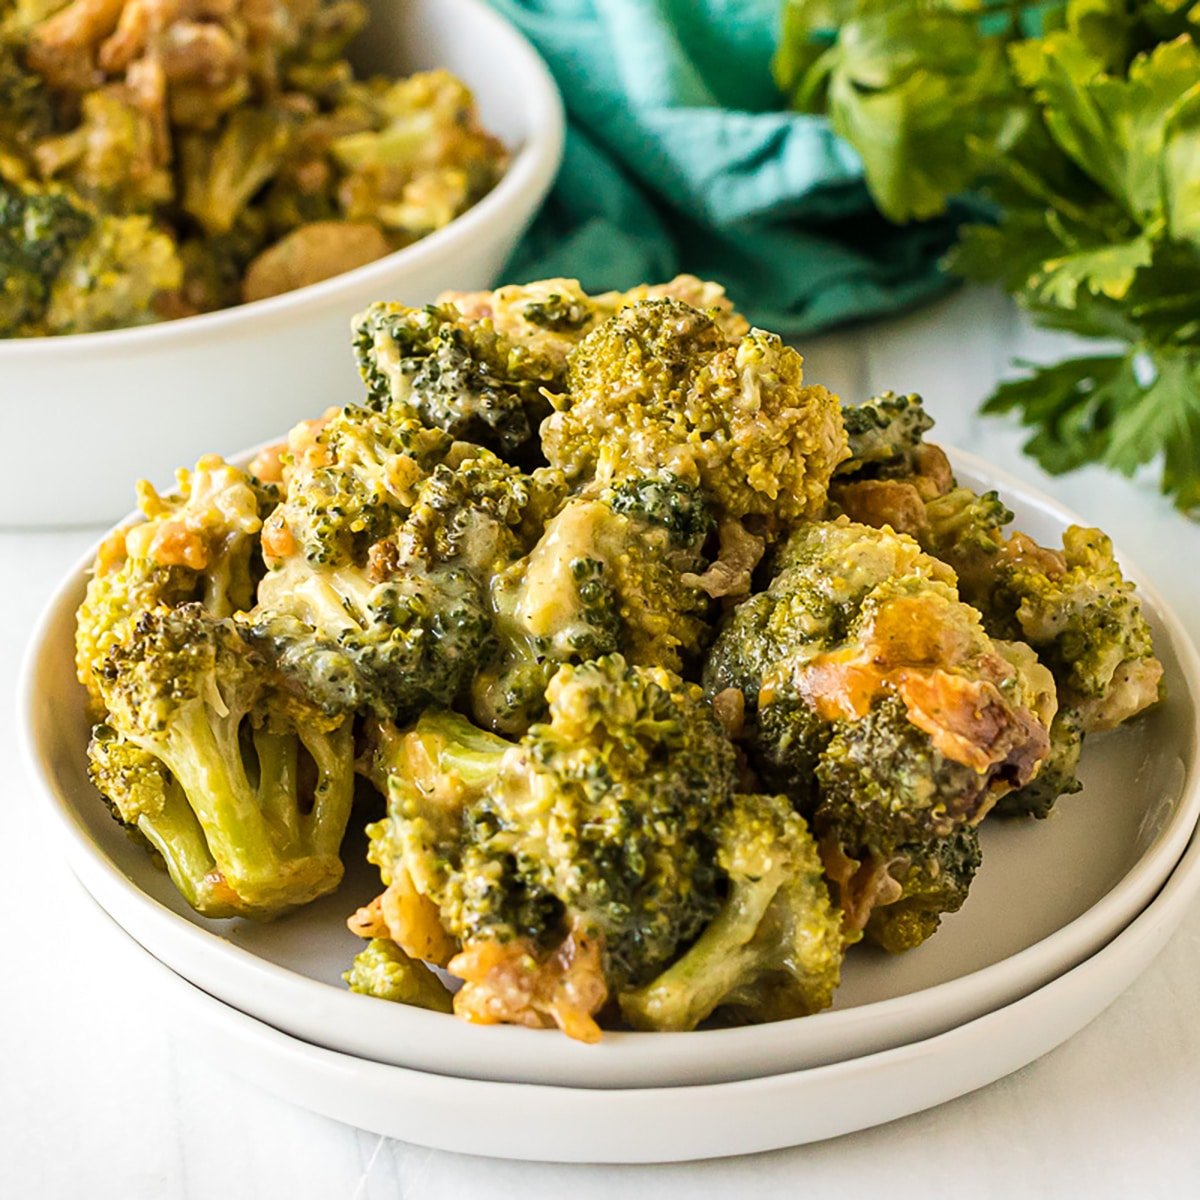 https://www.persnicketyplates.com/wp-content/uploads/2022/10/slow-cooker-broccoli-casserole-25-SQUARE.jpg